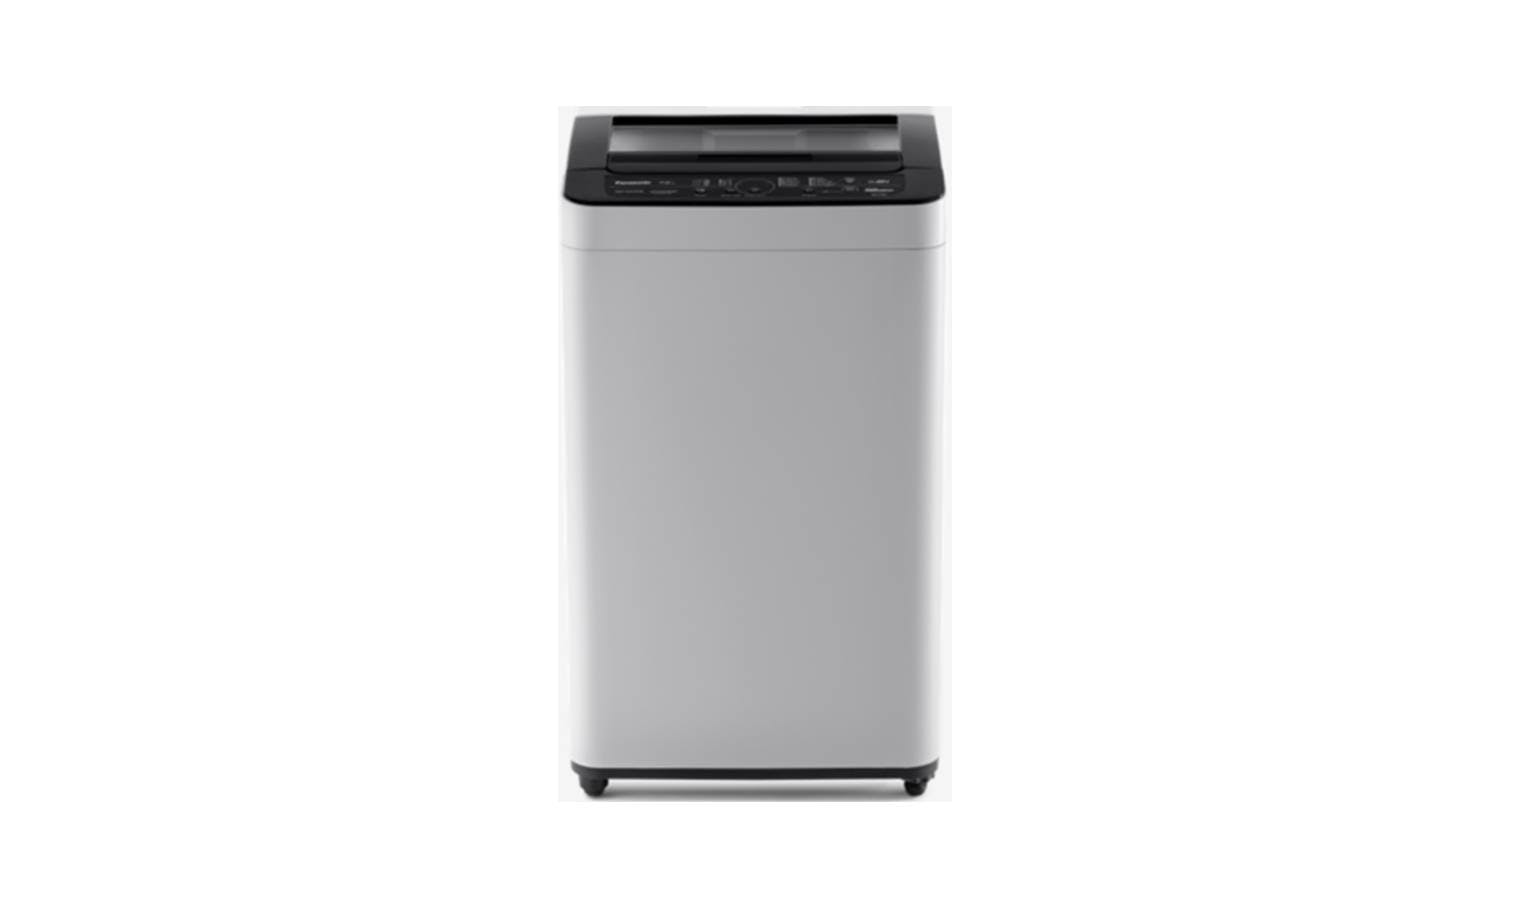 https://hnsgsfp.imgix.net/4/images/detailed/45/Panasonic_NA-F75S7HRQ_7.5KG_Top_Load_Washer_Light_Grey-01.jpg?fit=fill&bg=0FFF&w=1536&h=900&auto=format,compress